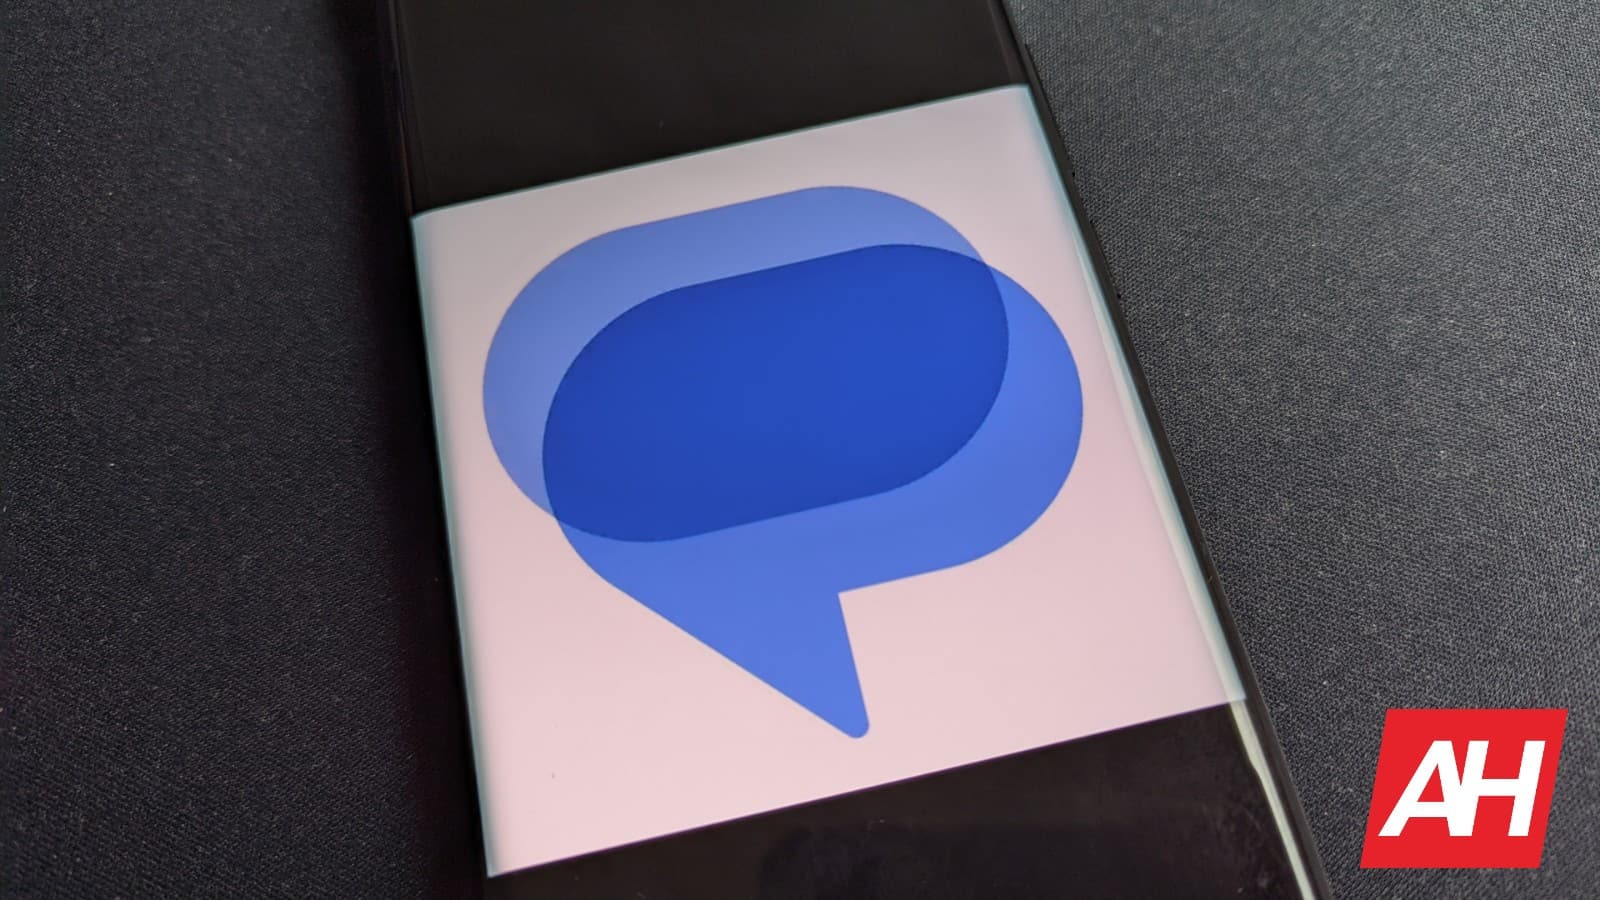 Google Messages Profile discovery feature is now rolling out to users